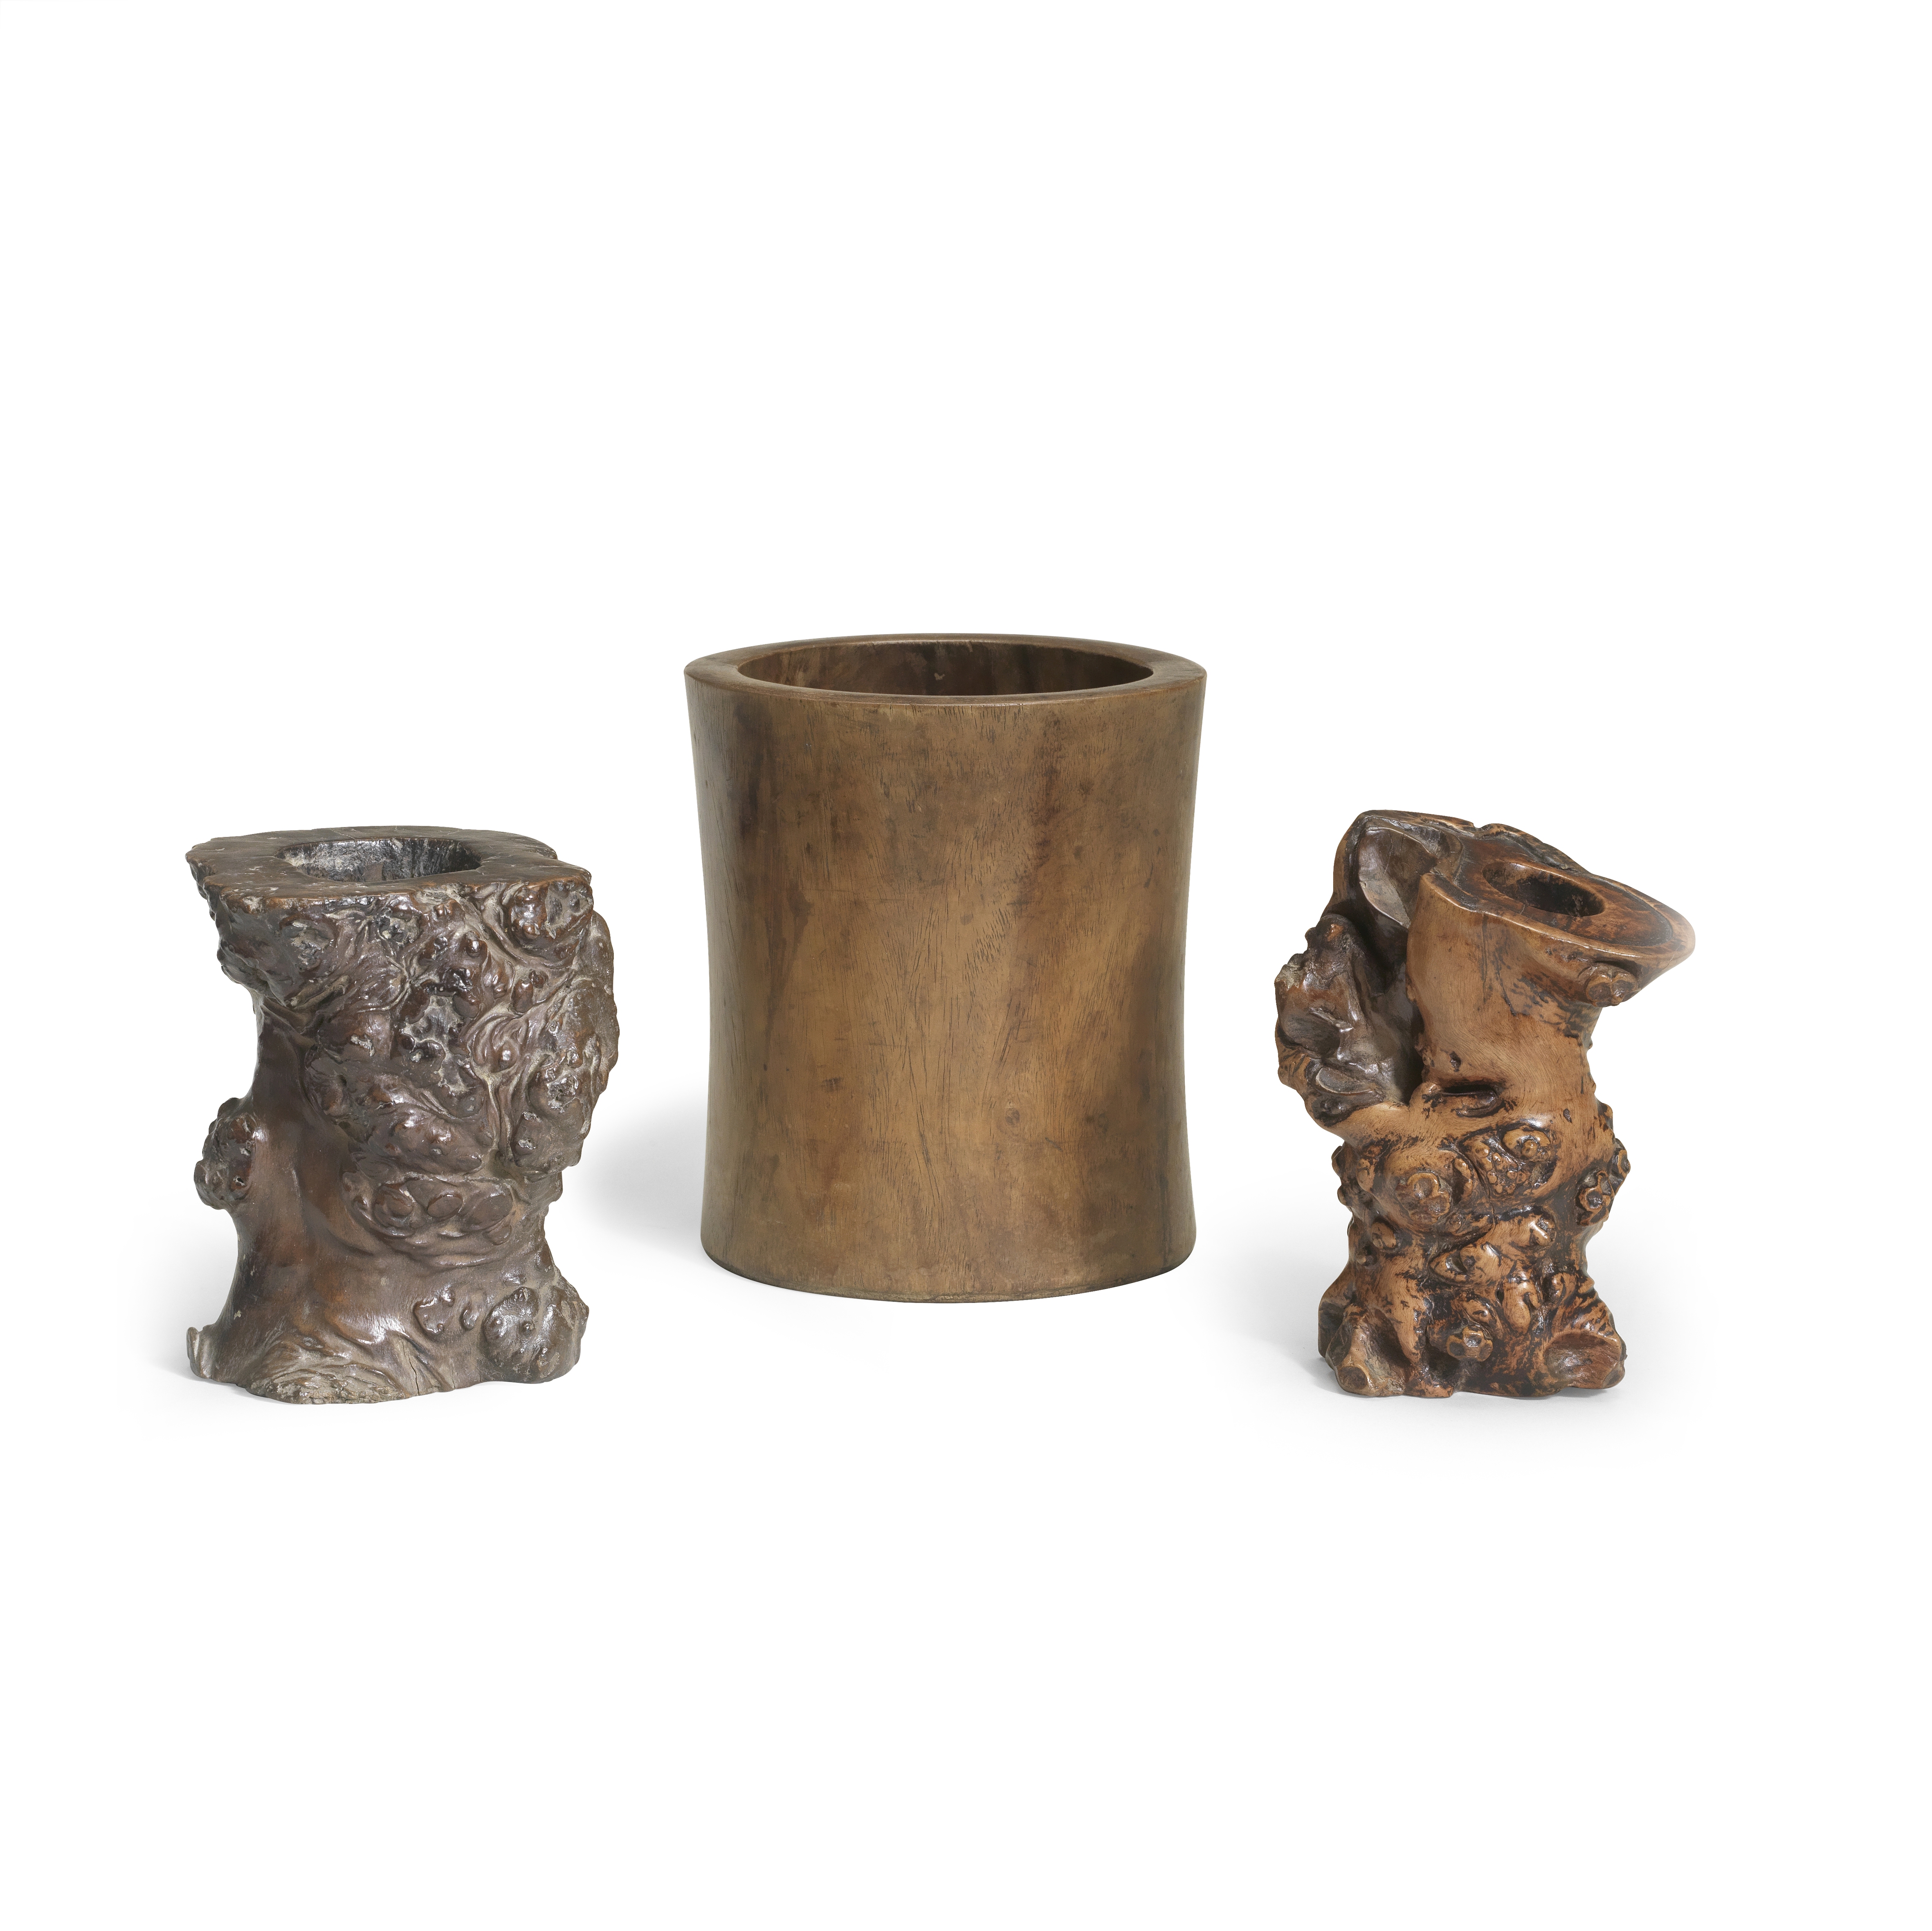 A HUANGHUALI BRUSHPOT AND TWO GNARLED ROOT WOOD BRUSHPOTS, BITONG 18th/19th century (3)